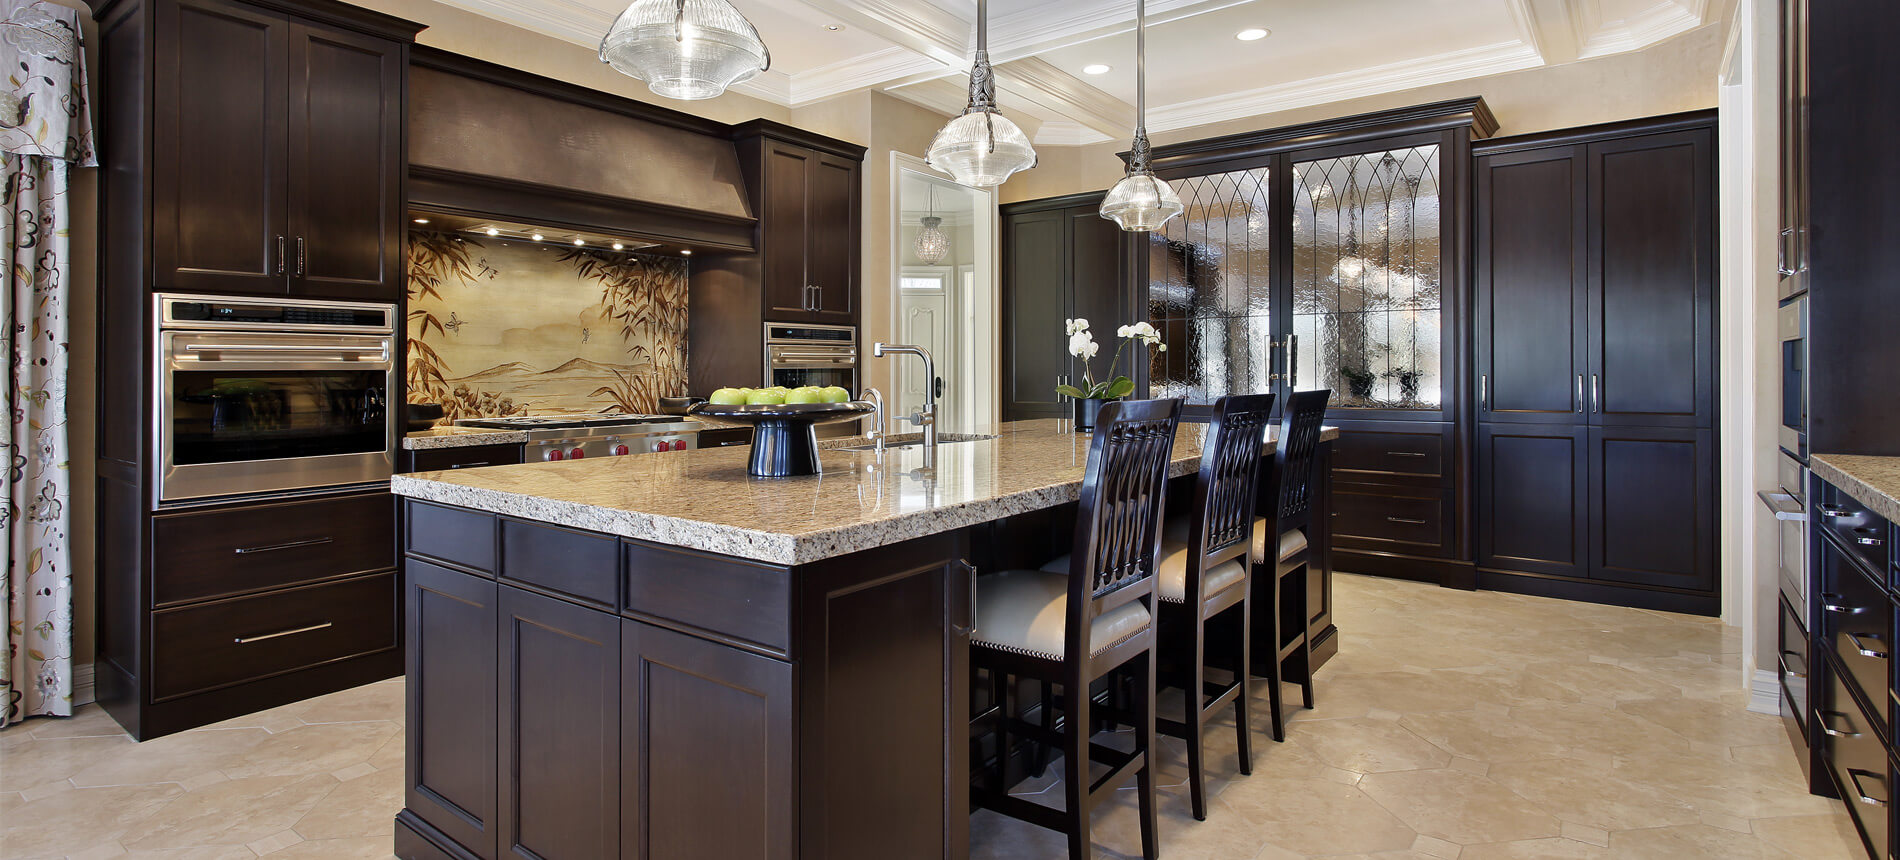 kitchen remodeling - rfmc | the remodeling specialist TGSWKNP